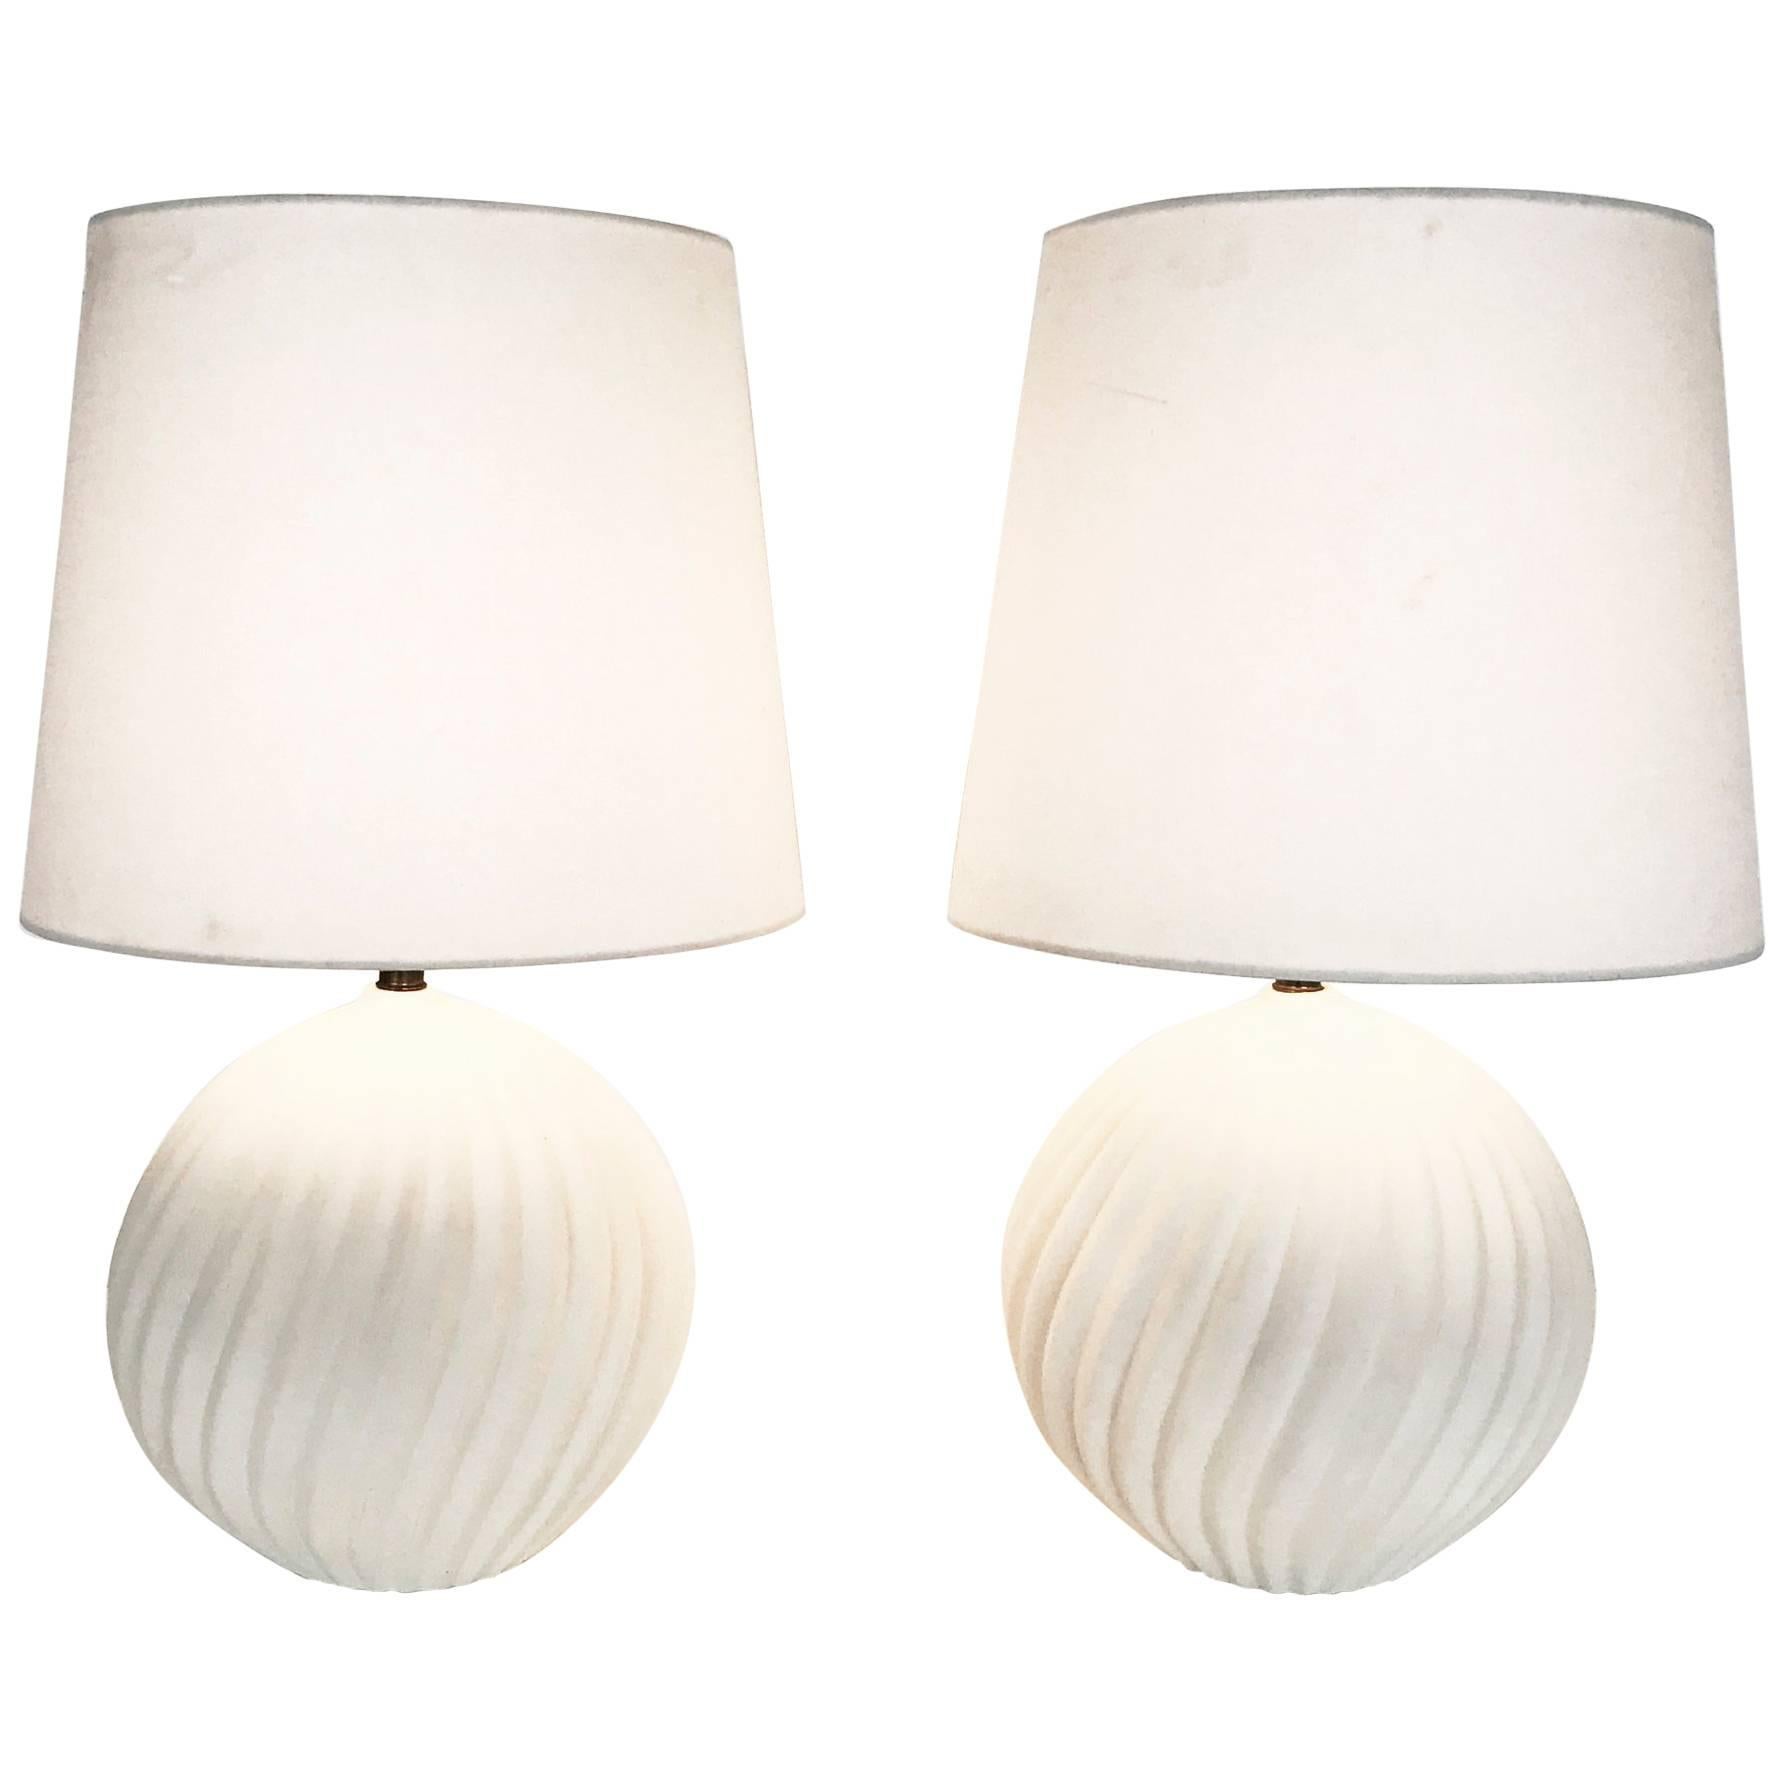 Pair of Spherical Unglazed Ceramic Table Lamps with Twisted Fluting, 1980s